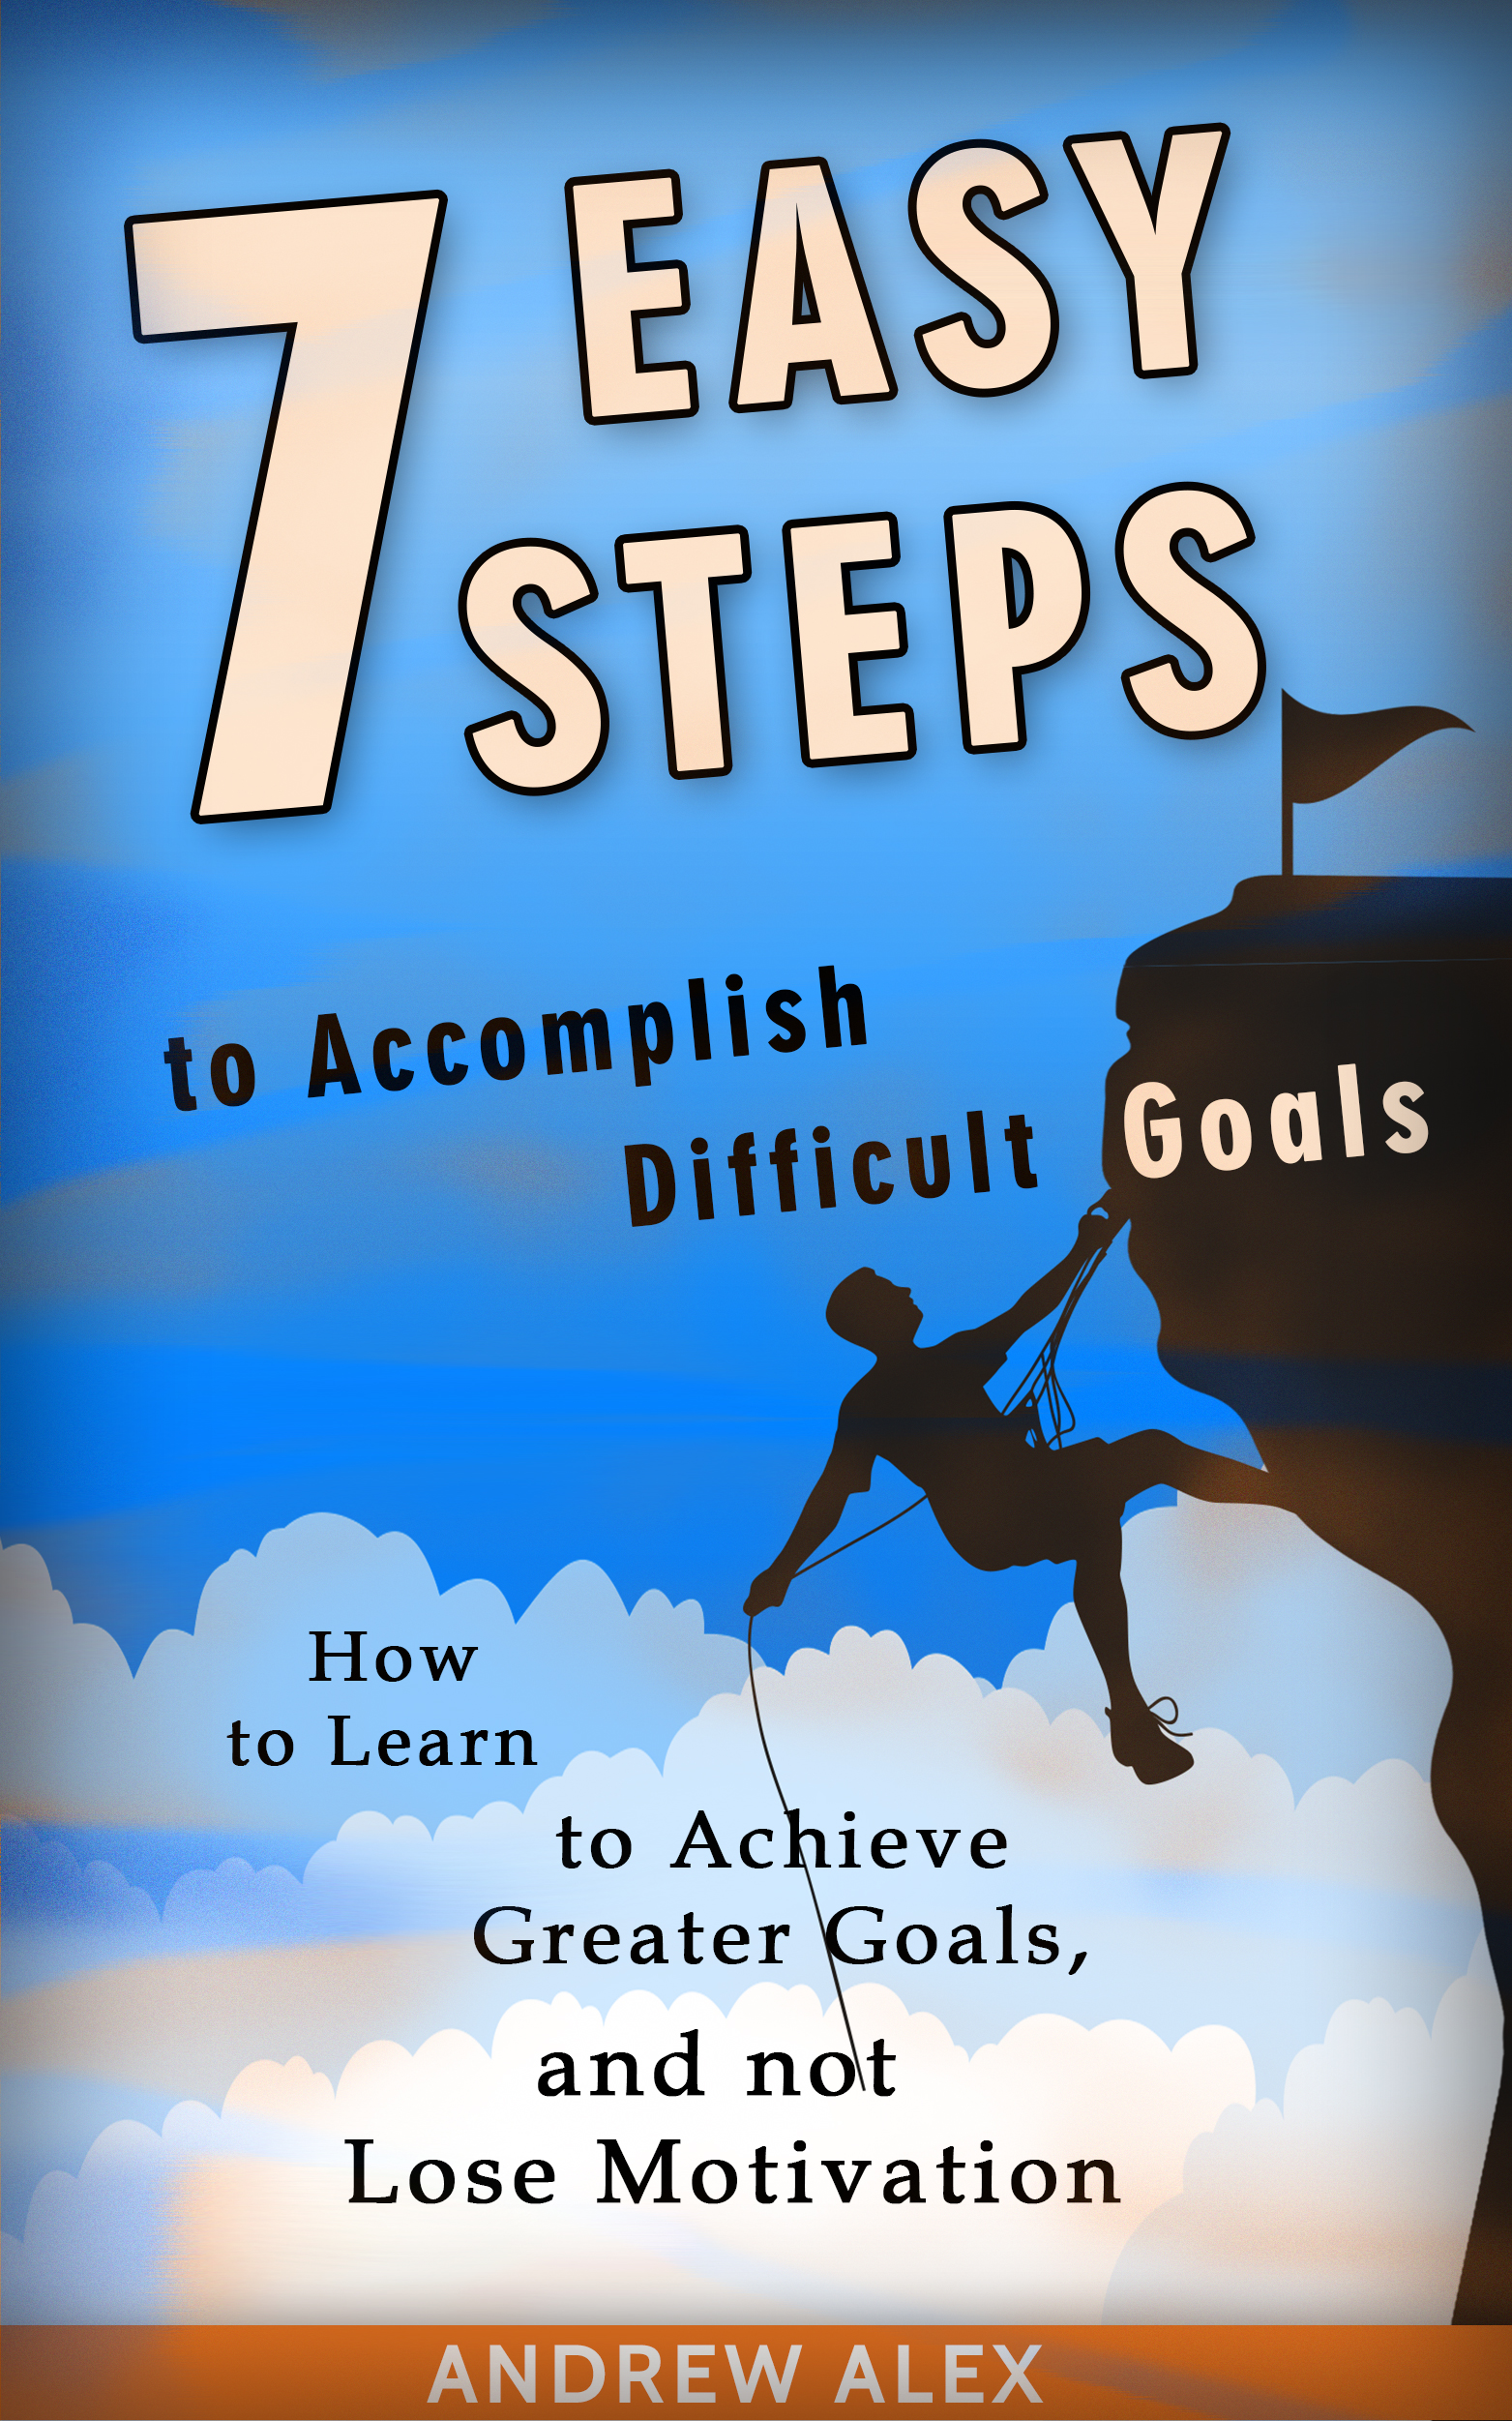 FREE: 7 Easy Steps to Accomplish Difficult Goals by Andrew Alex